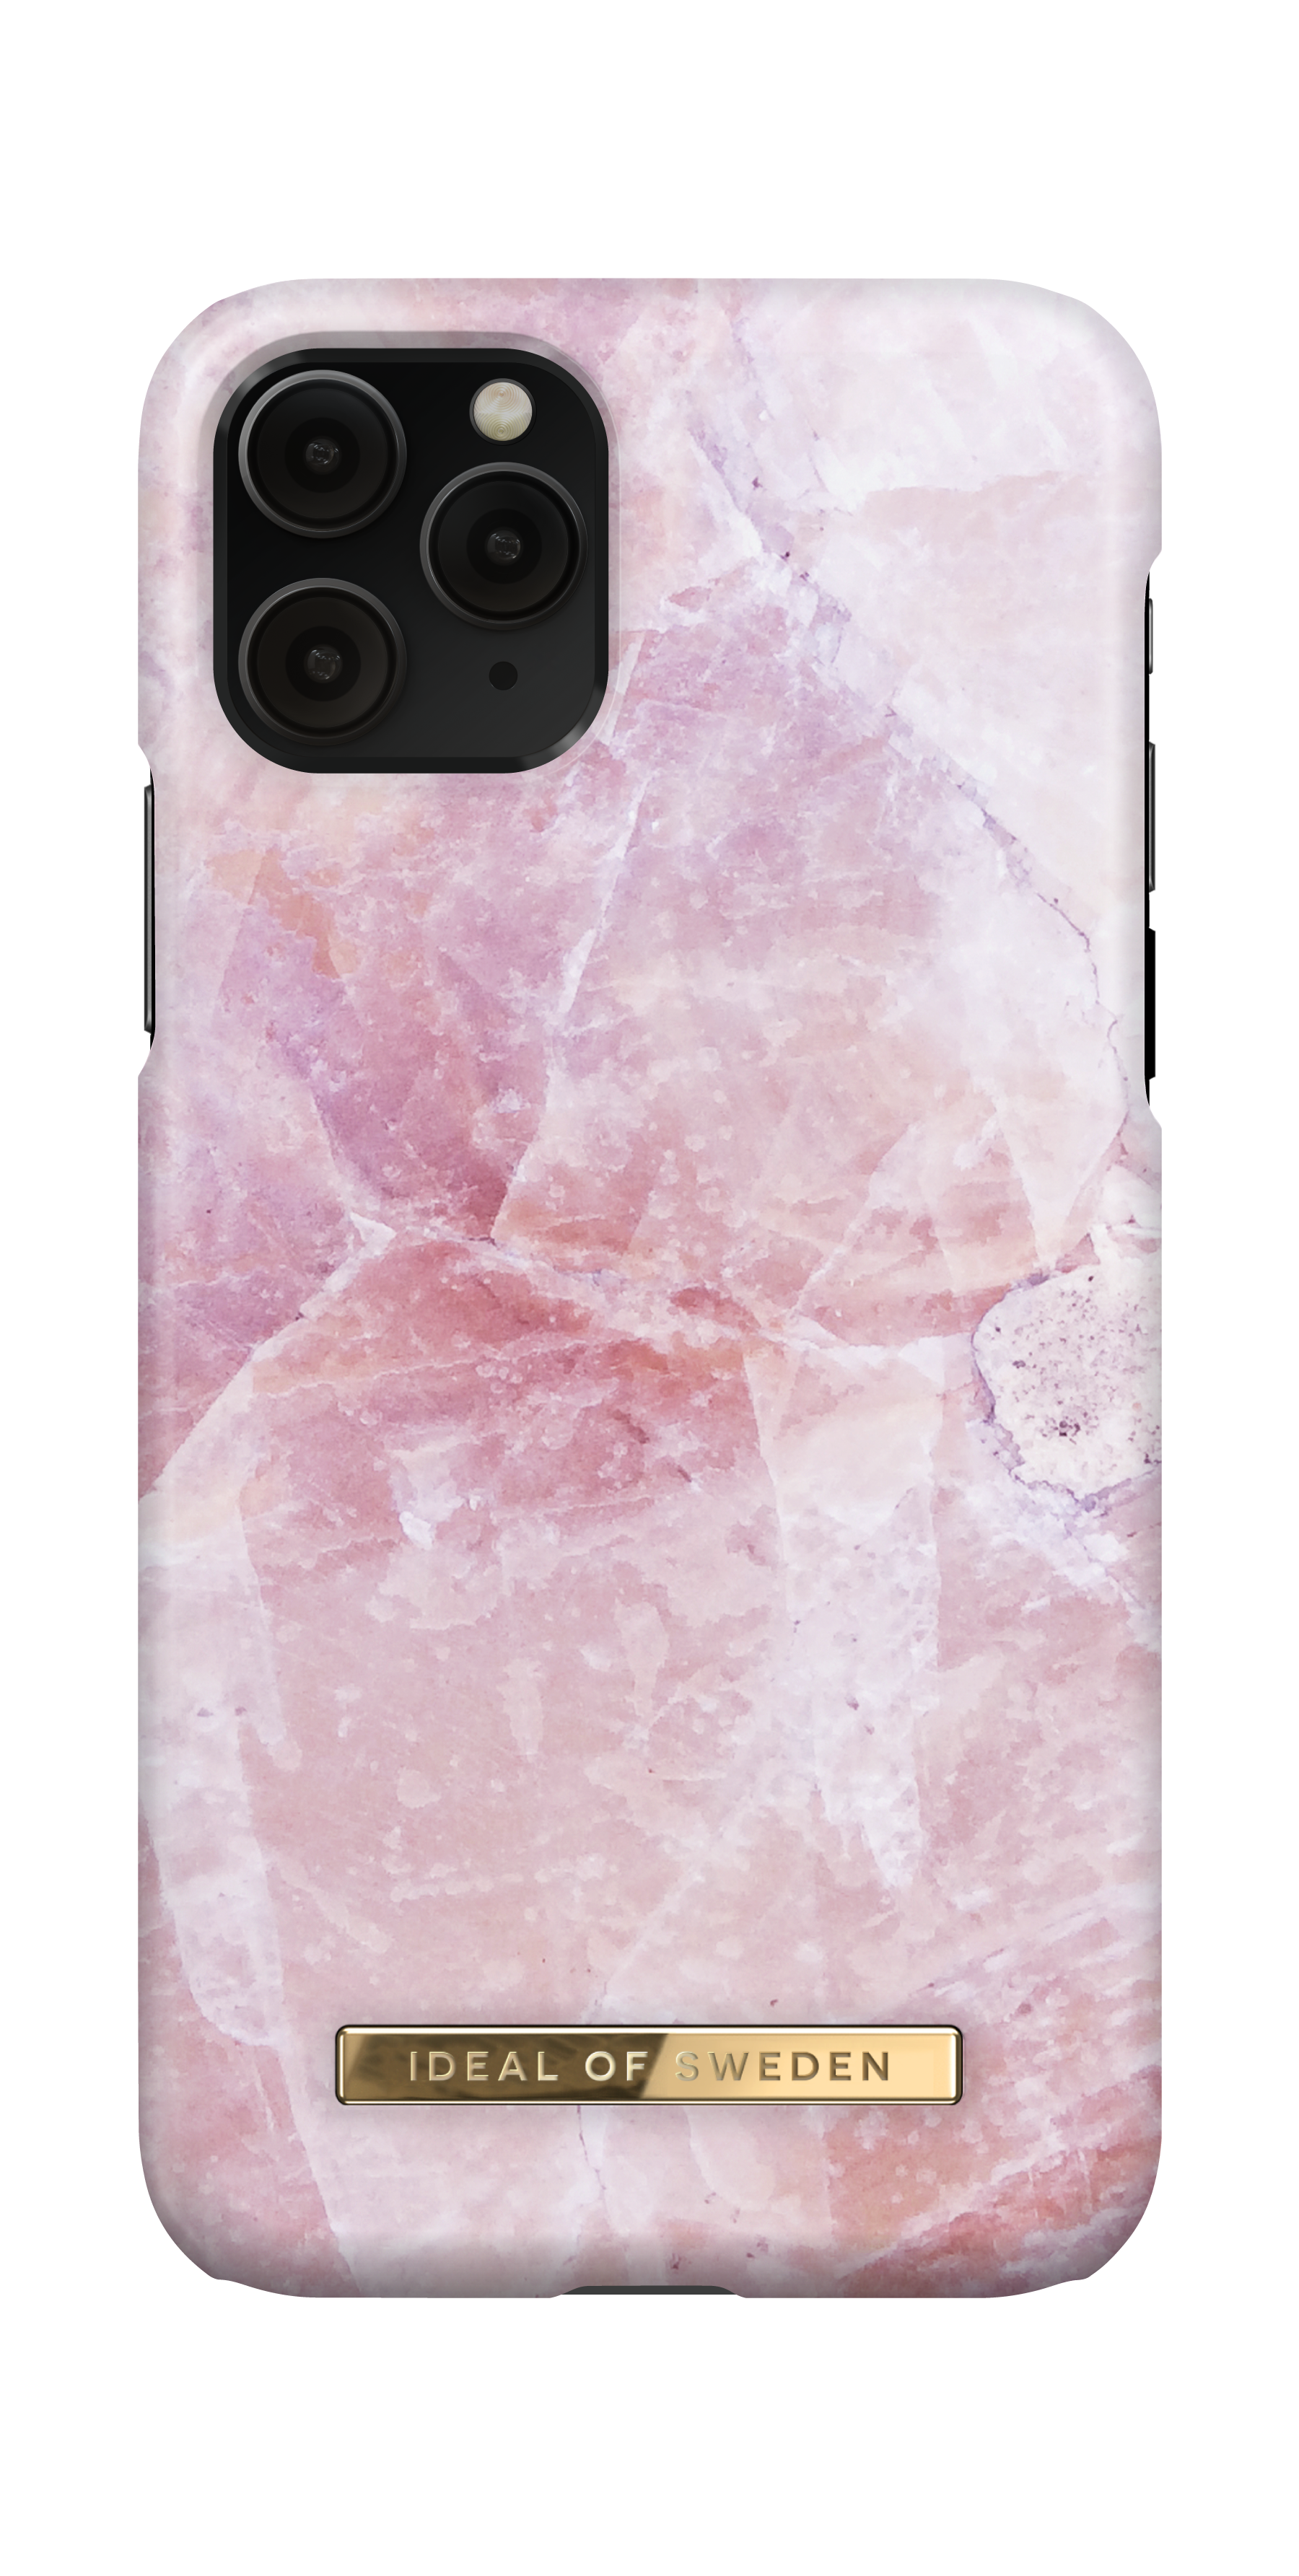 iPhone iPhone iPhone 11 IDEAL X, Backcover, Pilion Pro, Marble SWEDEN XS, OF Pink Apple, IDFCS17-I1958-52,